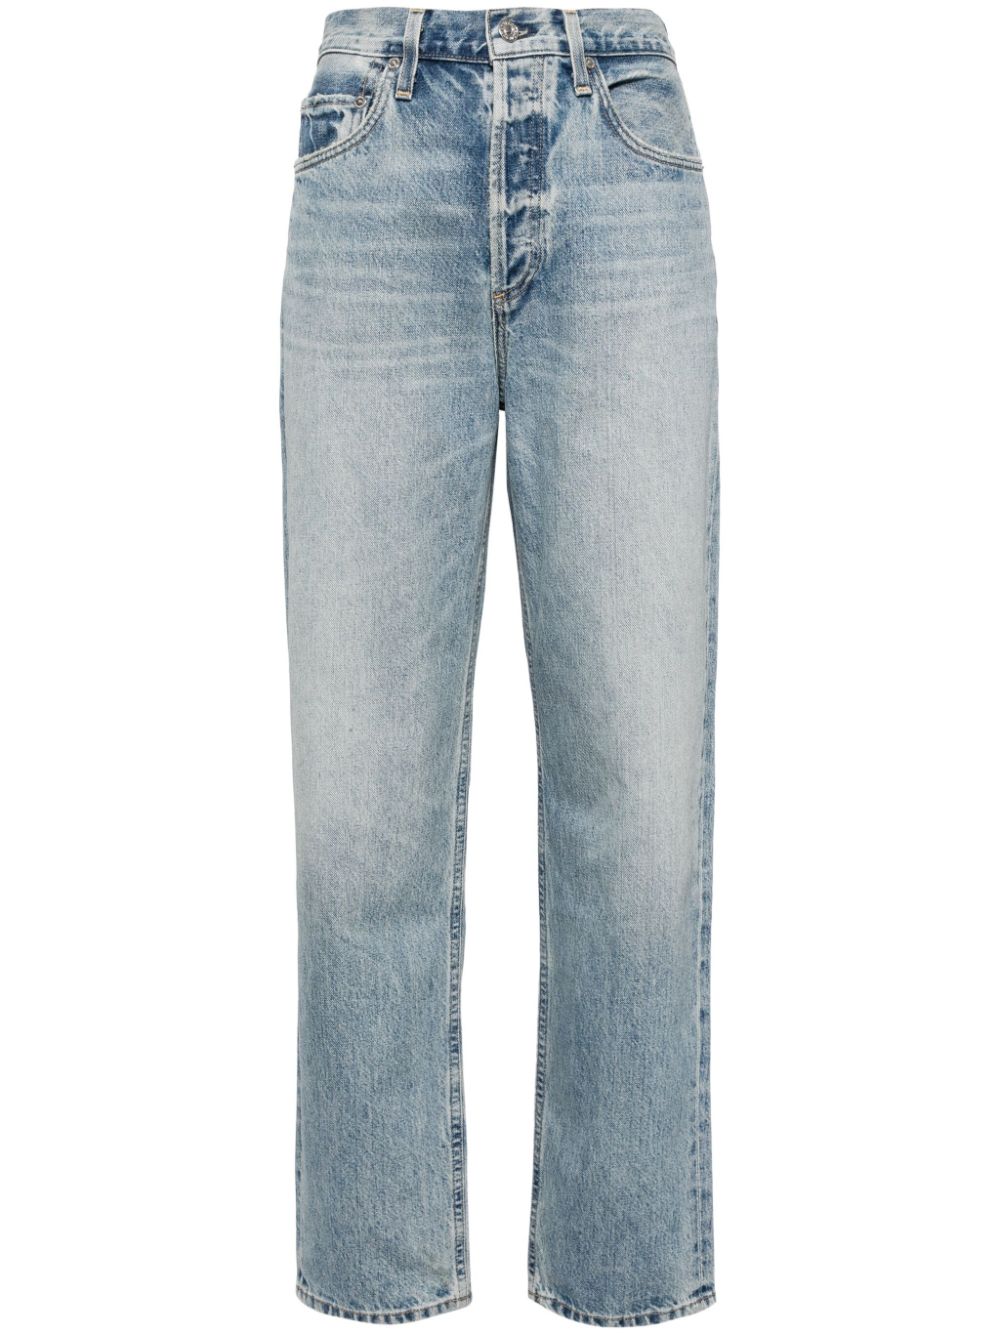 Citizens of Humanity Devi tapered jeans - Blue von Citizens of Humanity